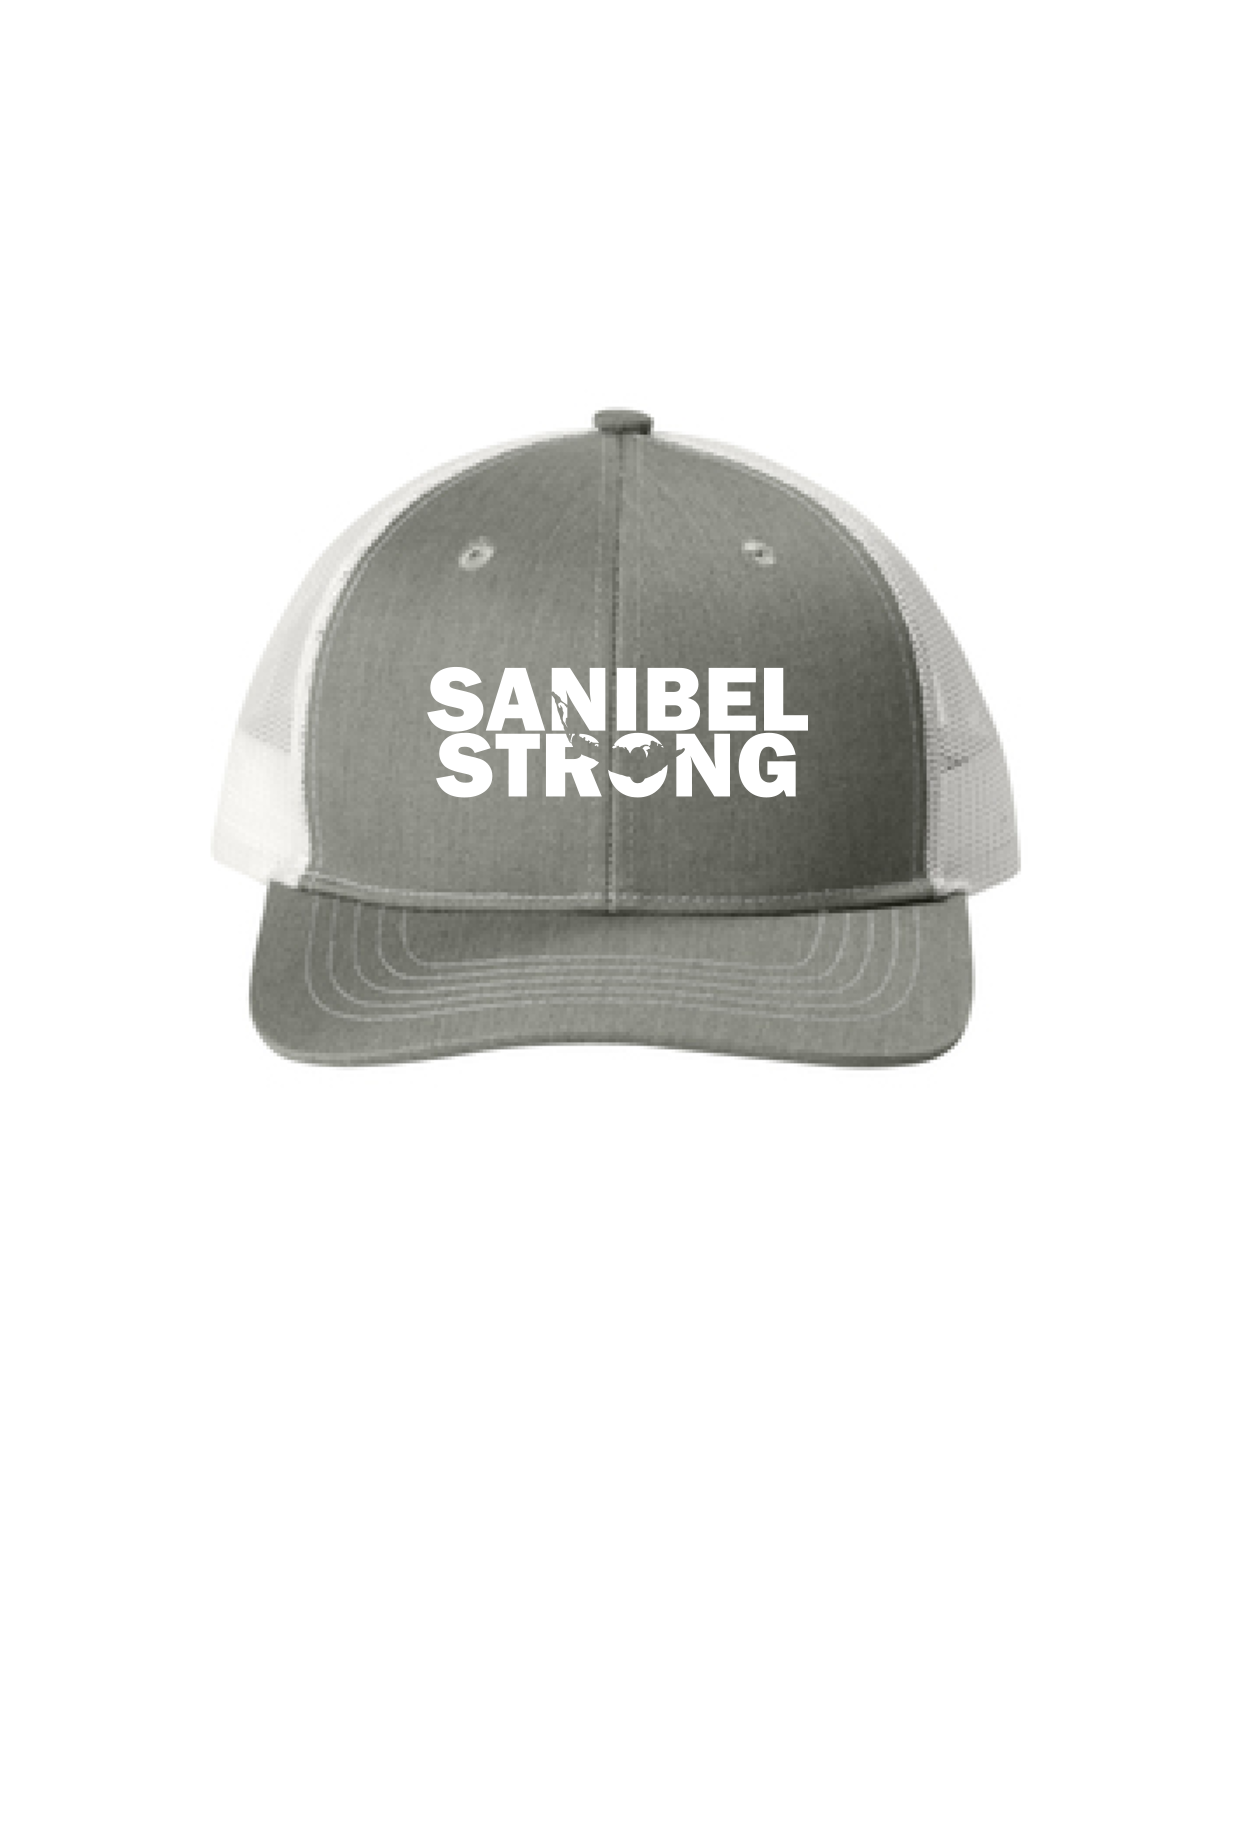 Youth Sanibel Strong Hat